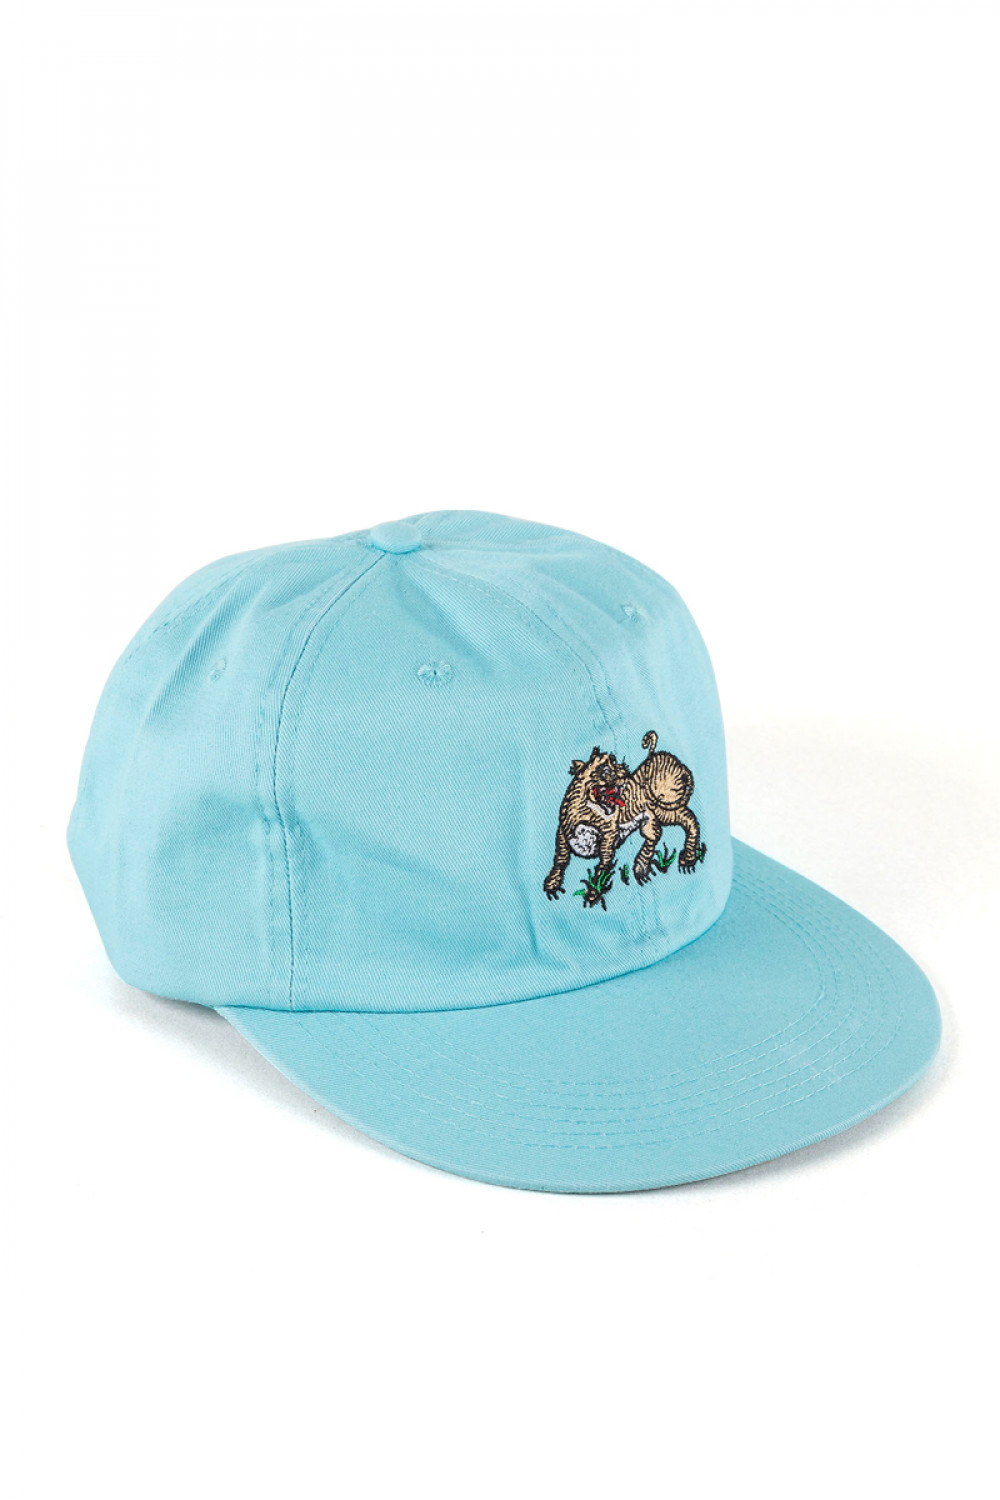 TIGER MOM / Daddy Cap / TURQUOISE